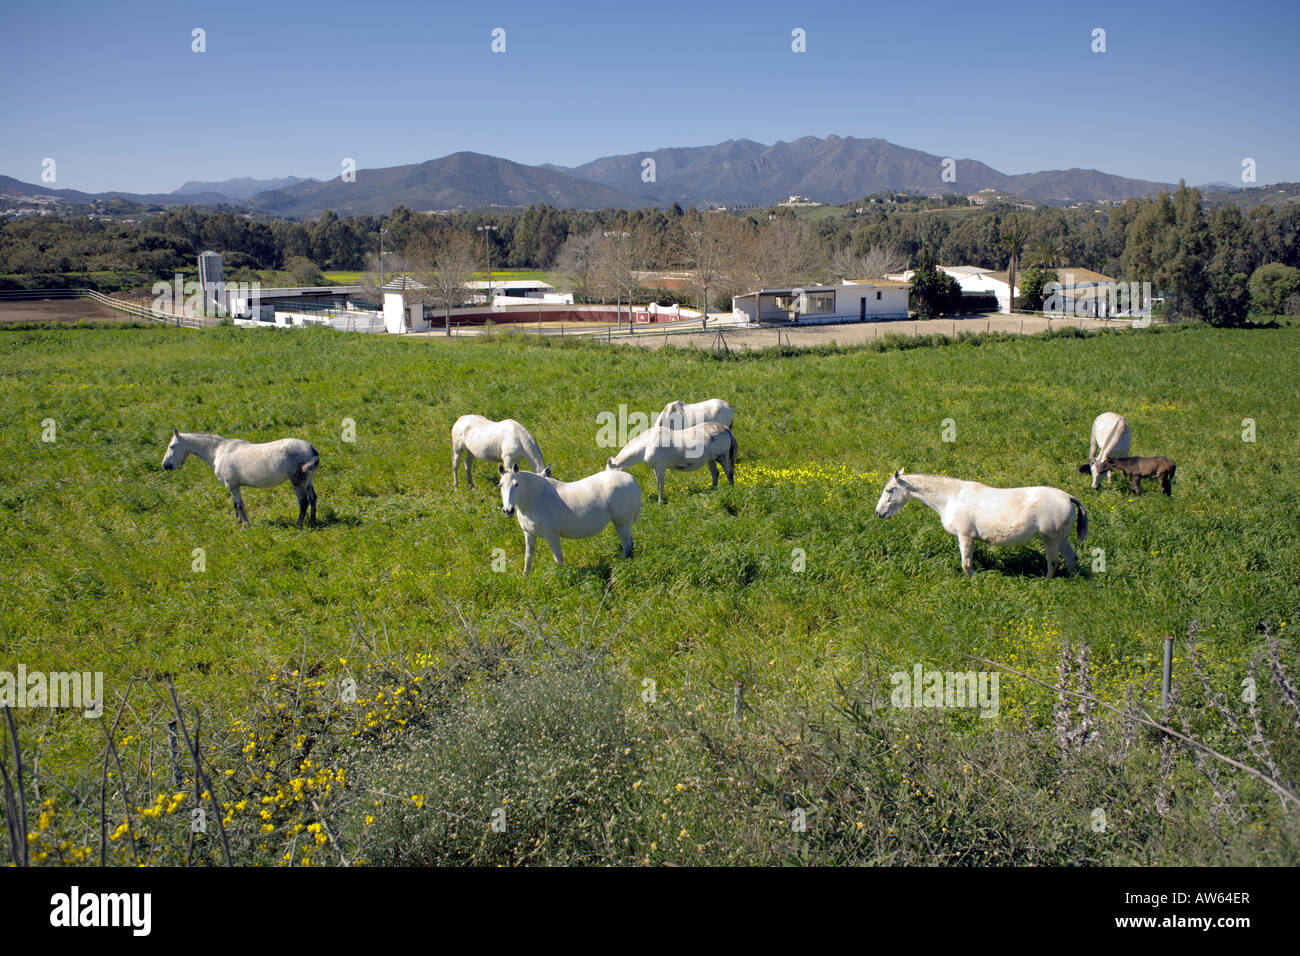 Field of horses Andalucia, Spain Stock Photo